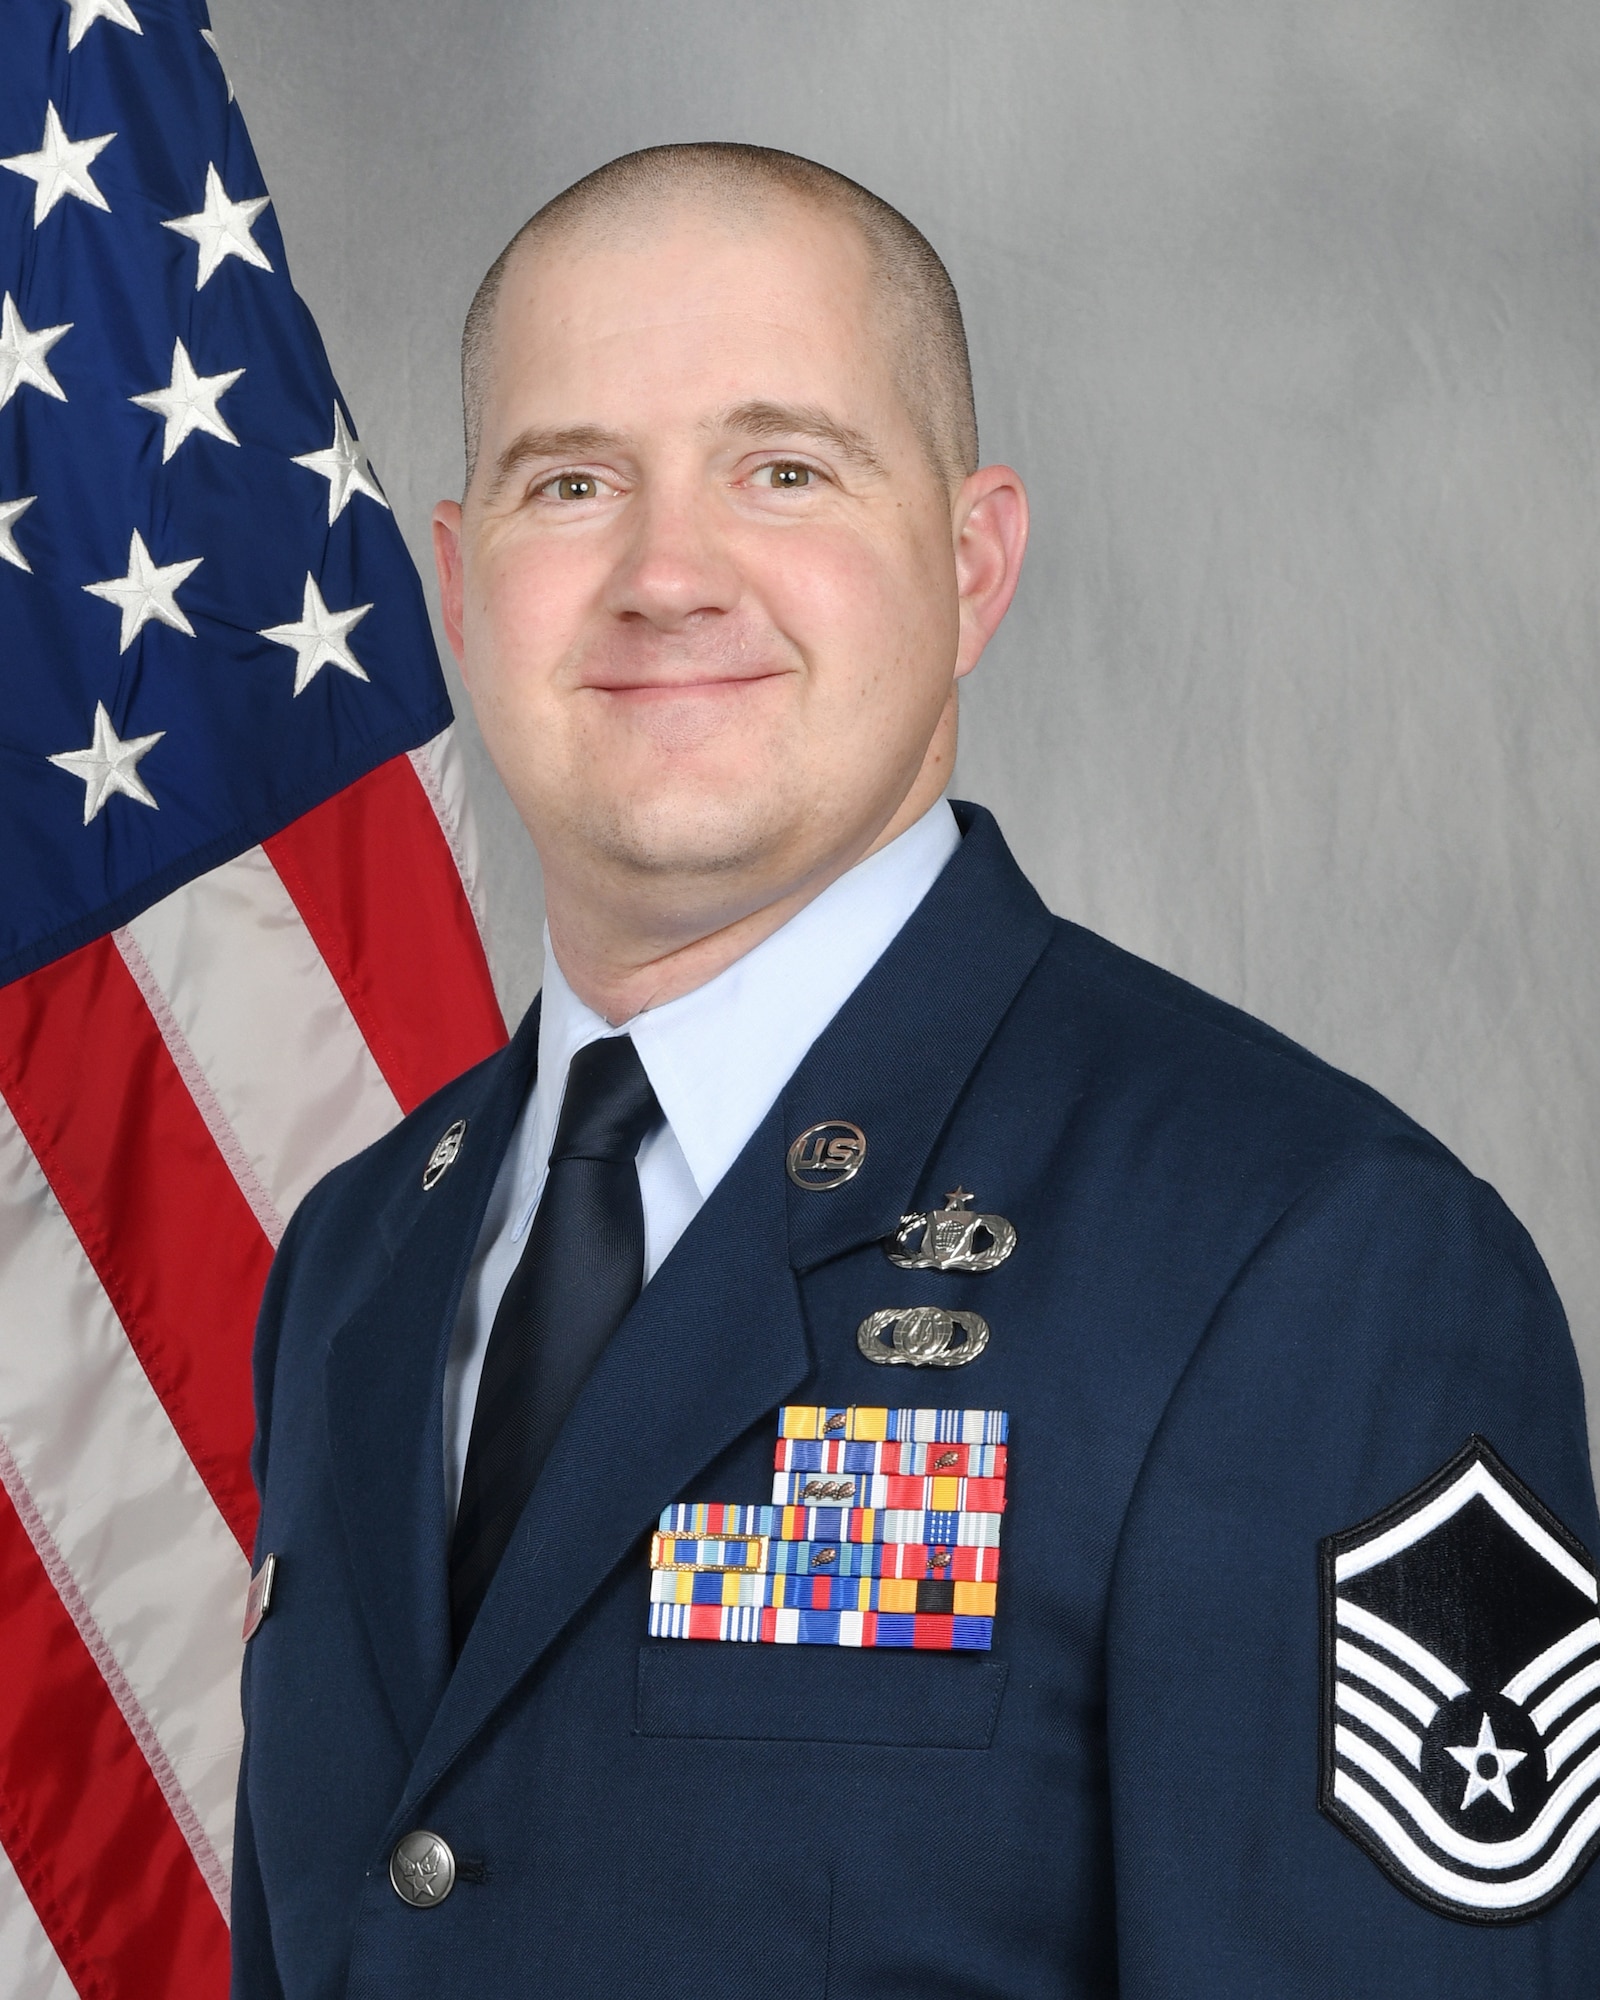 Official Air Force photo for Master Sgt. Benjamin Middleton. Assigned to the 157th Air Operations Group, Middleton is the 131st Bomb Wing Senior NCO of the Year. (U.S. Air National Guard photo by Senior Master Sgt. Marydale Amison)